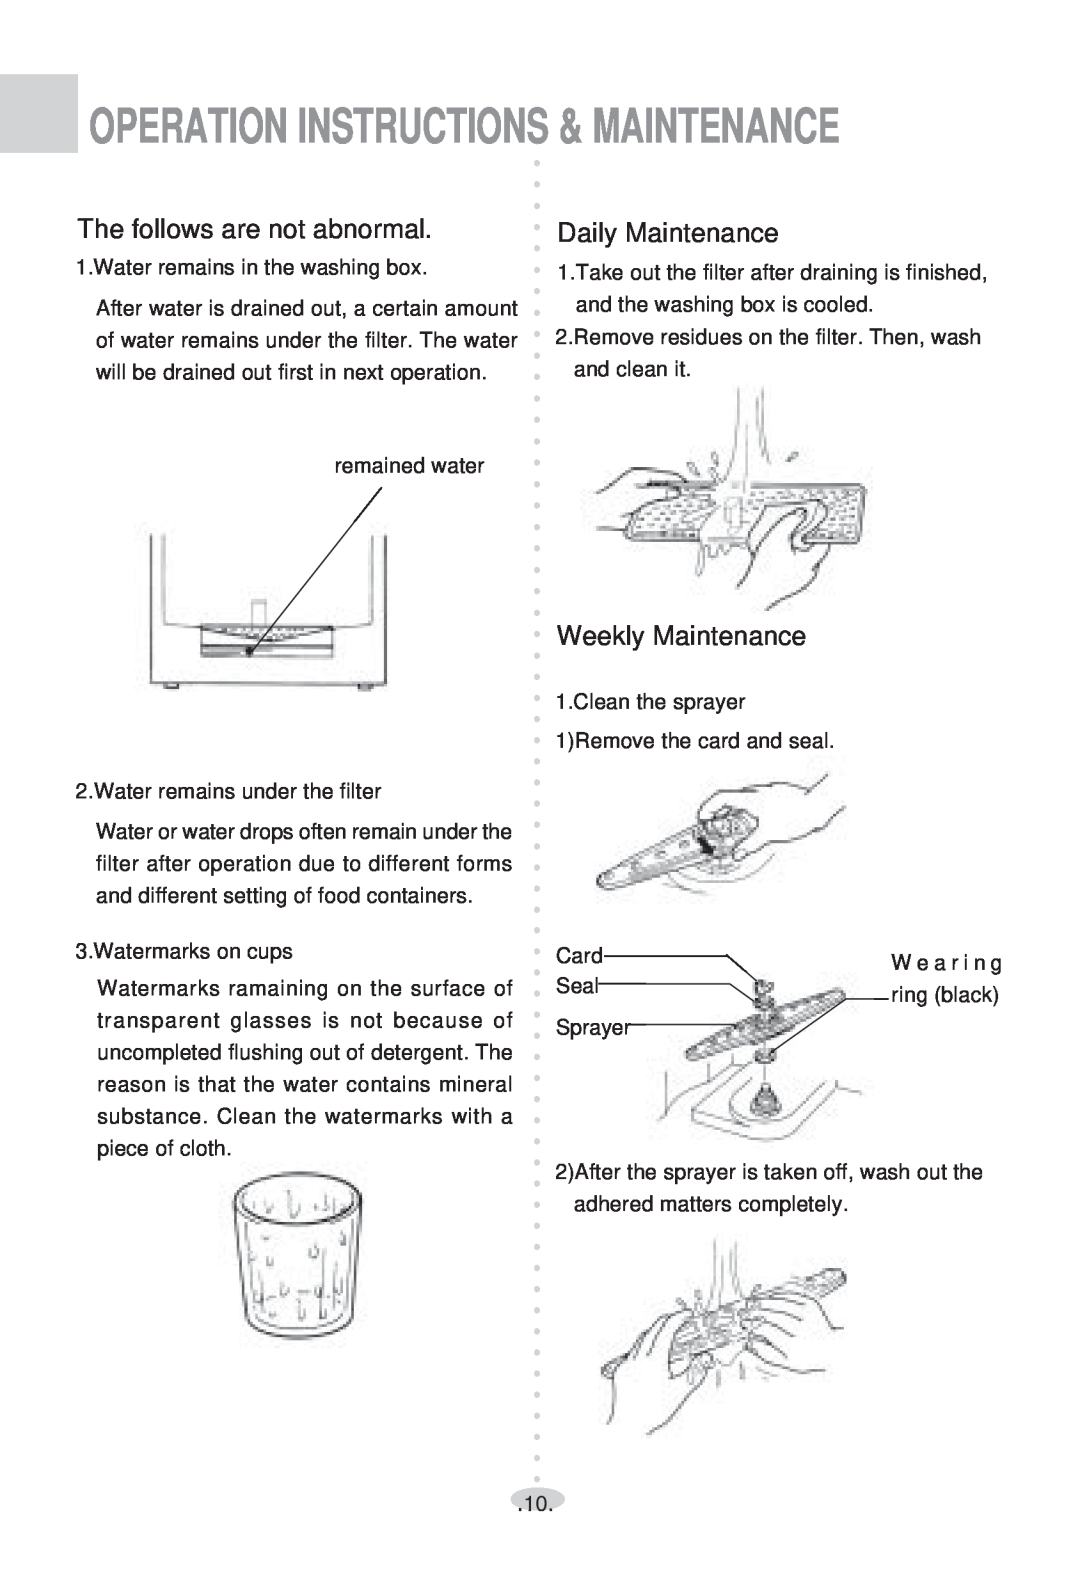 Haier WQP4-2000N Operation Instructions & Maintenance, The follows are not abnormal, Daily Maintenance, Weekly Maintenance 